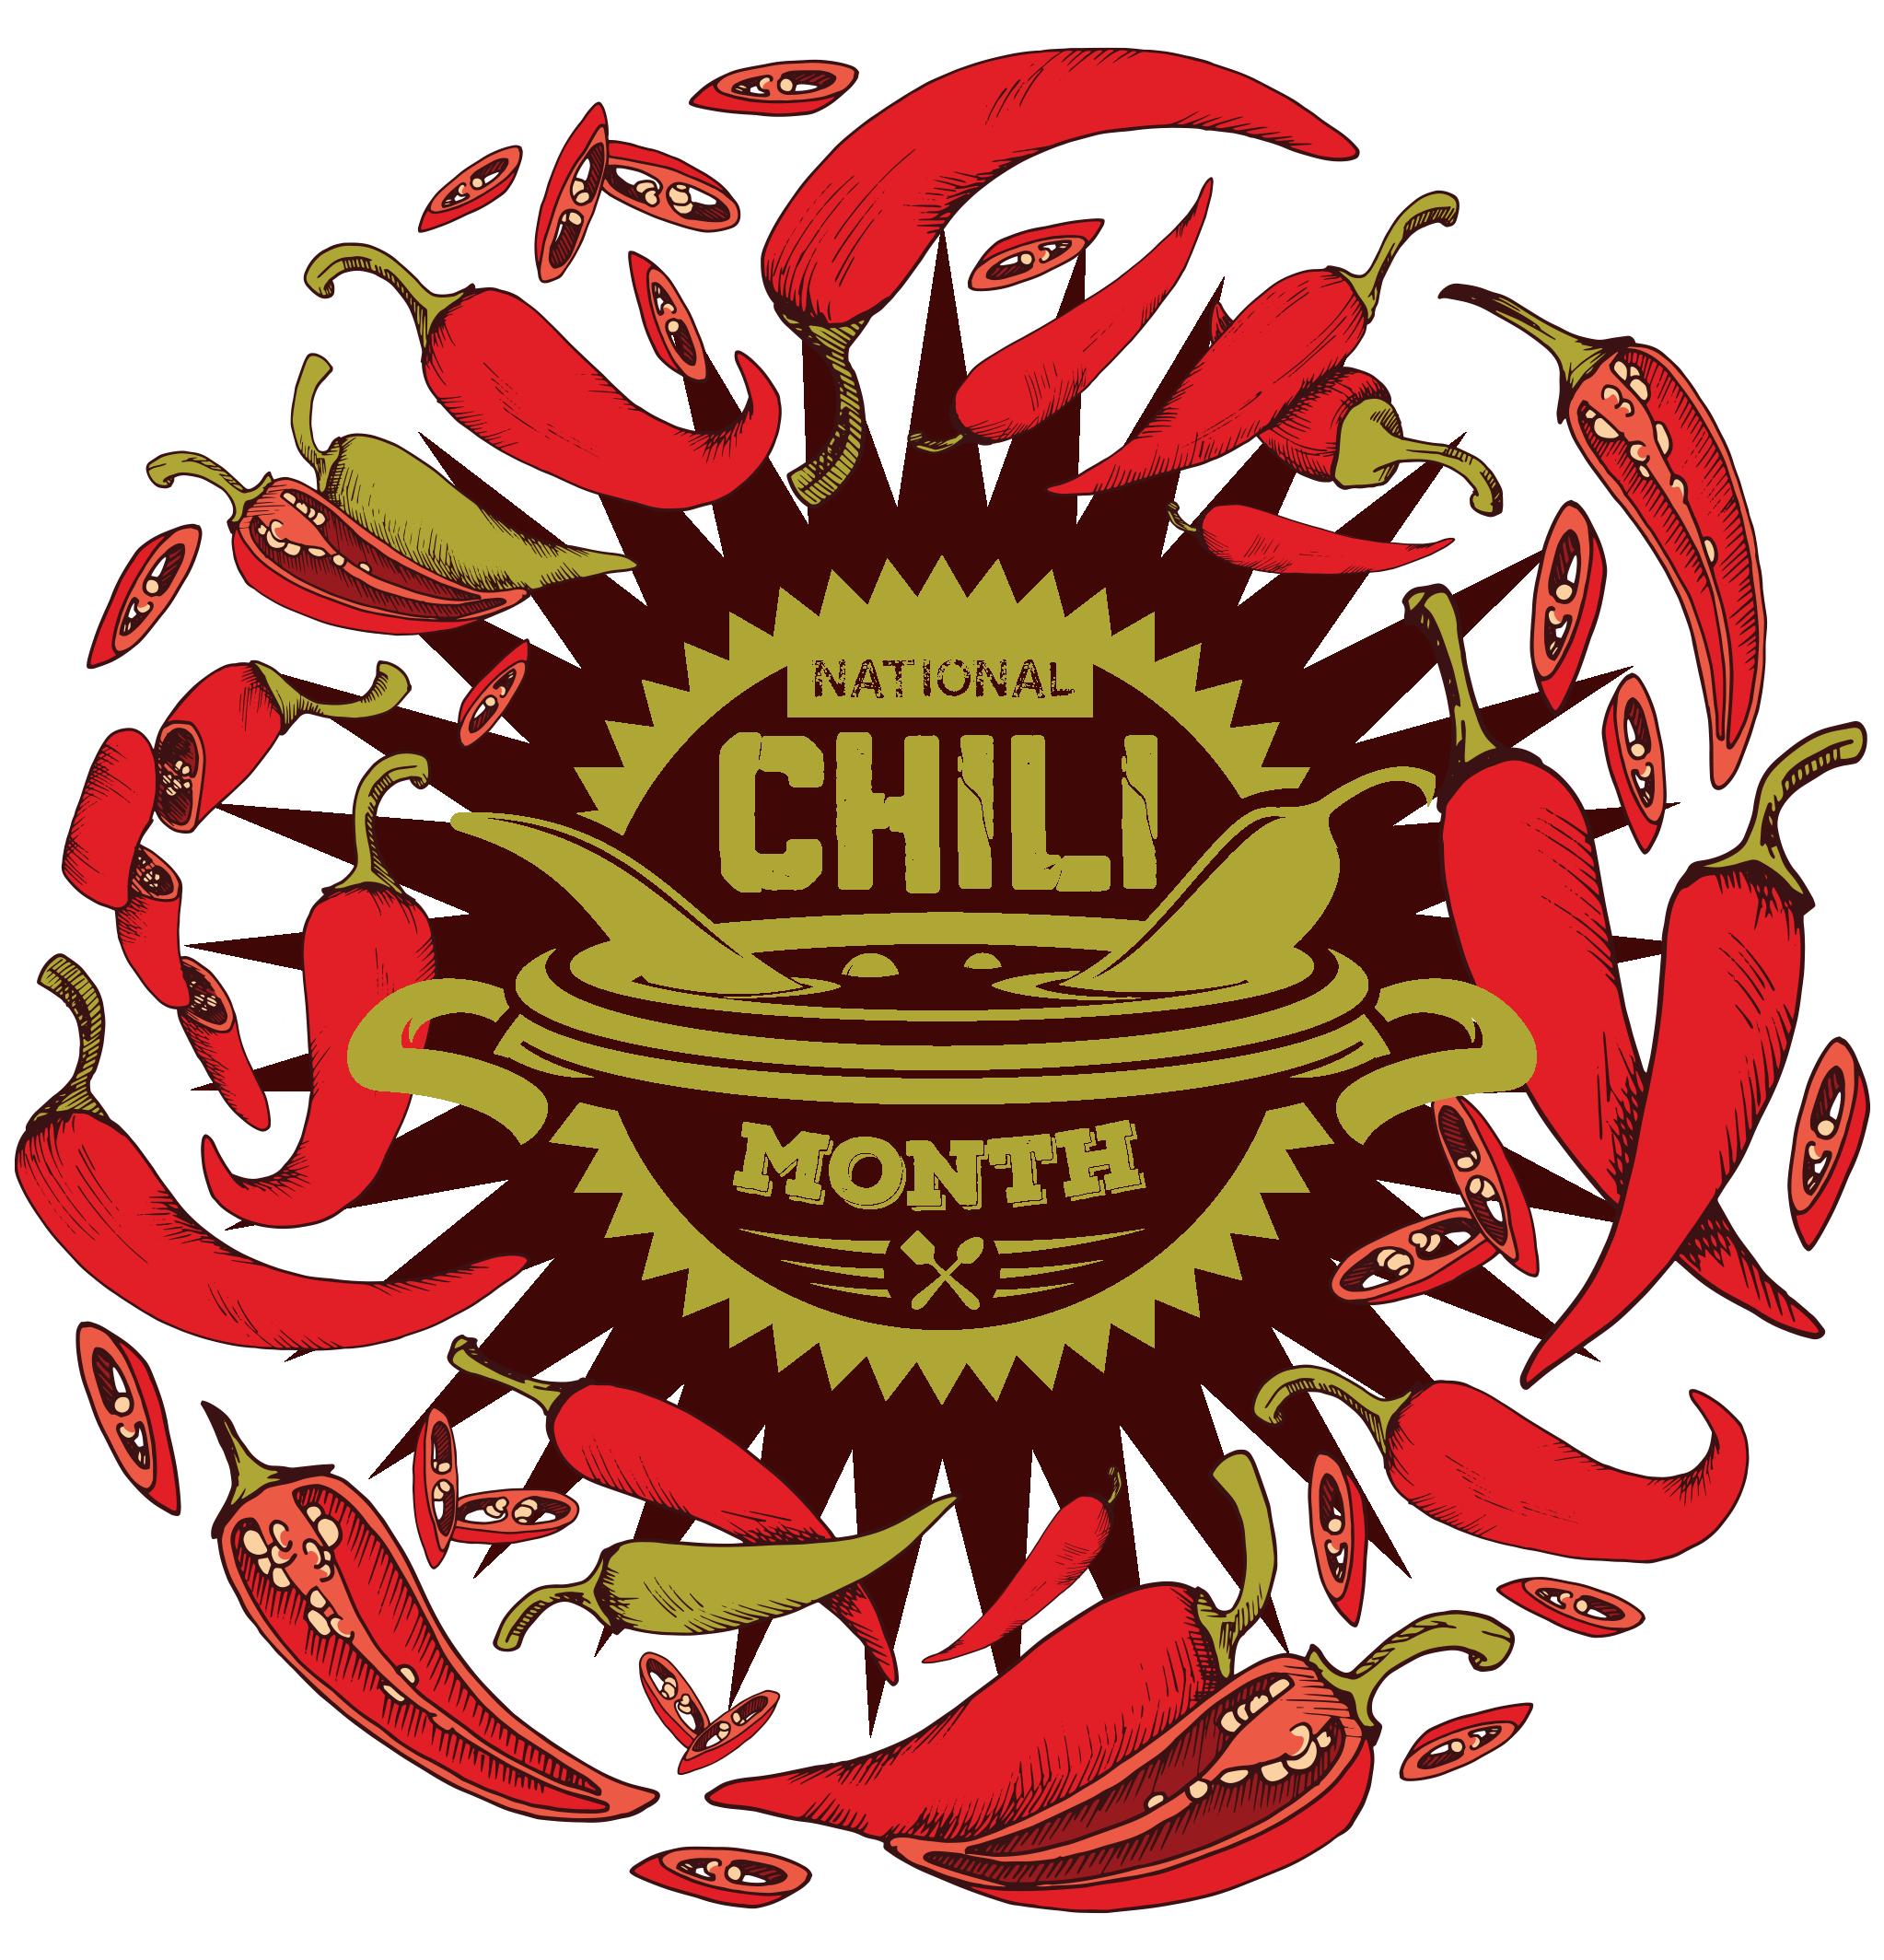 a poster for national chili month with lots of cartoon red peppers on a black background